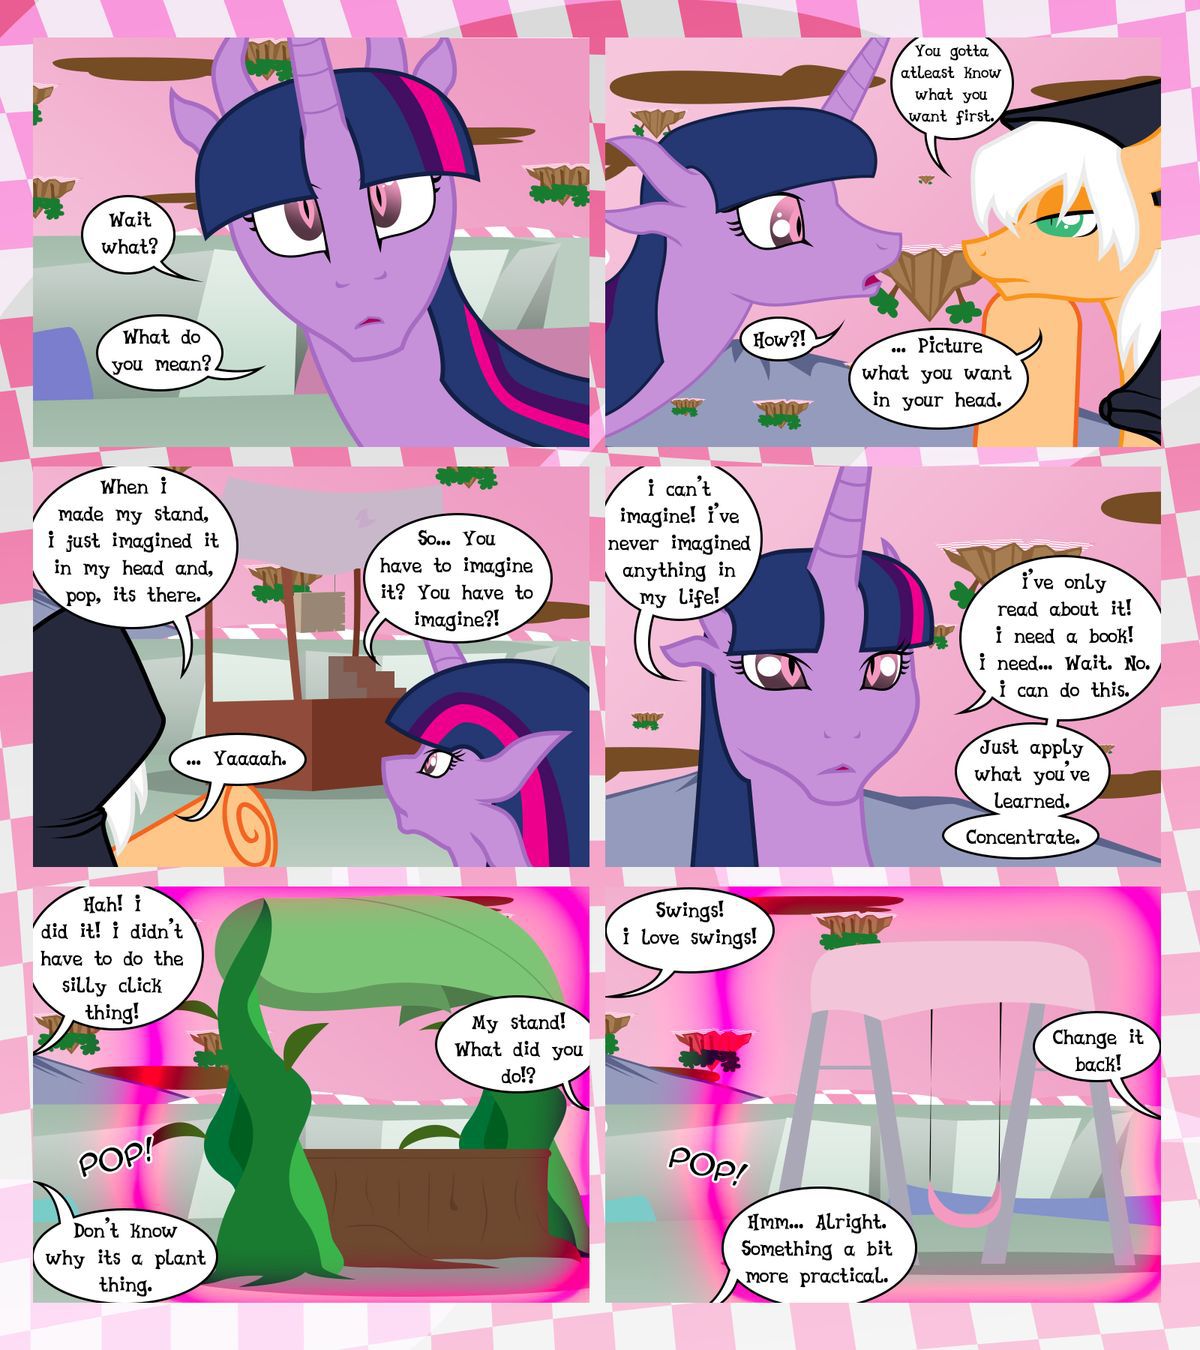 [GatesMcCloud] Cutie Mark Crusaders 10k: Chapter 3 - The Lost (My Little Pony: Friendship is Magic) [English] [Ongoing] 37